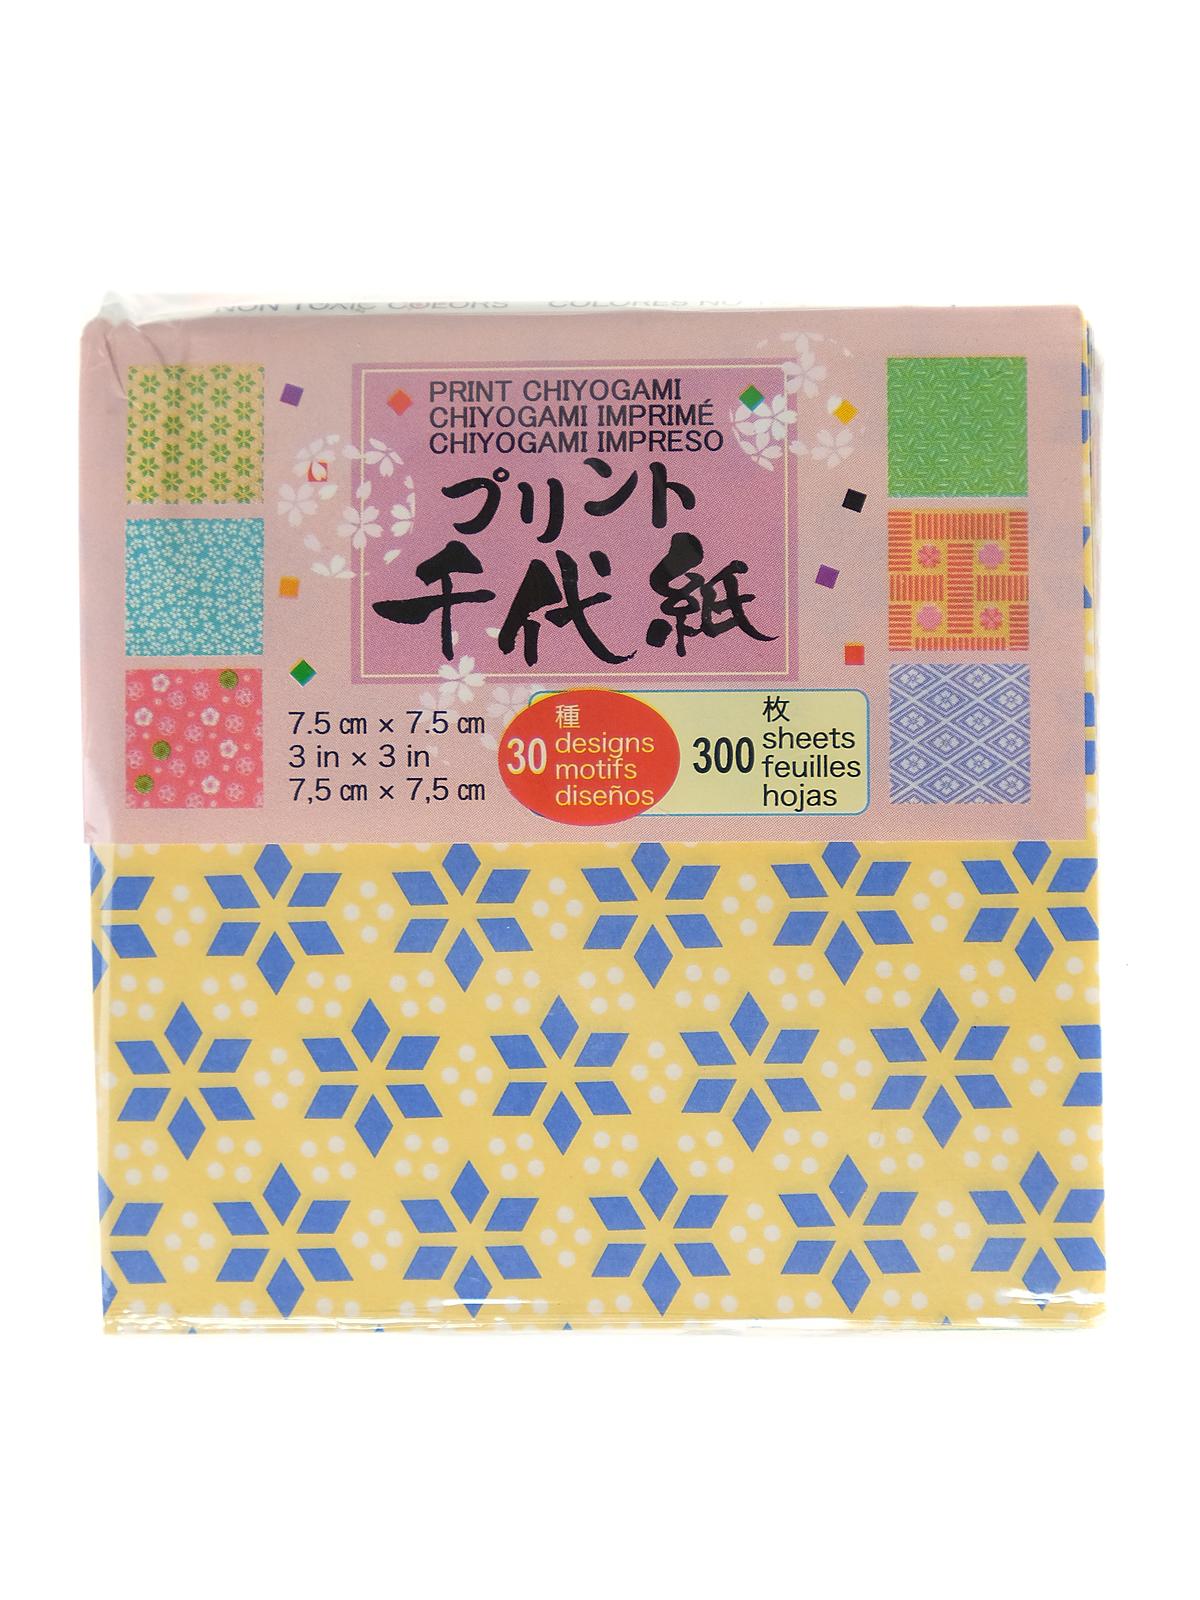 Origami Paper 3 In. X 3 In. Print Chiyogami 300 Sheets